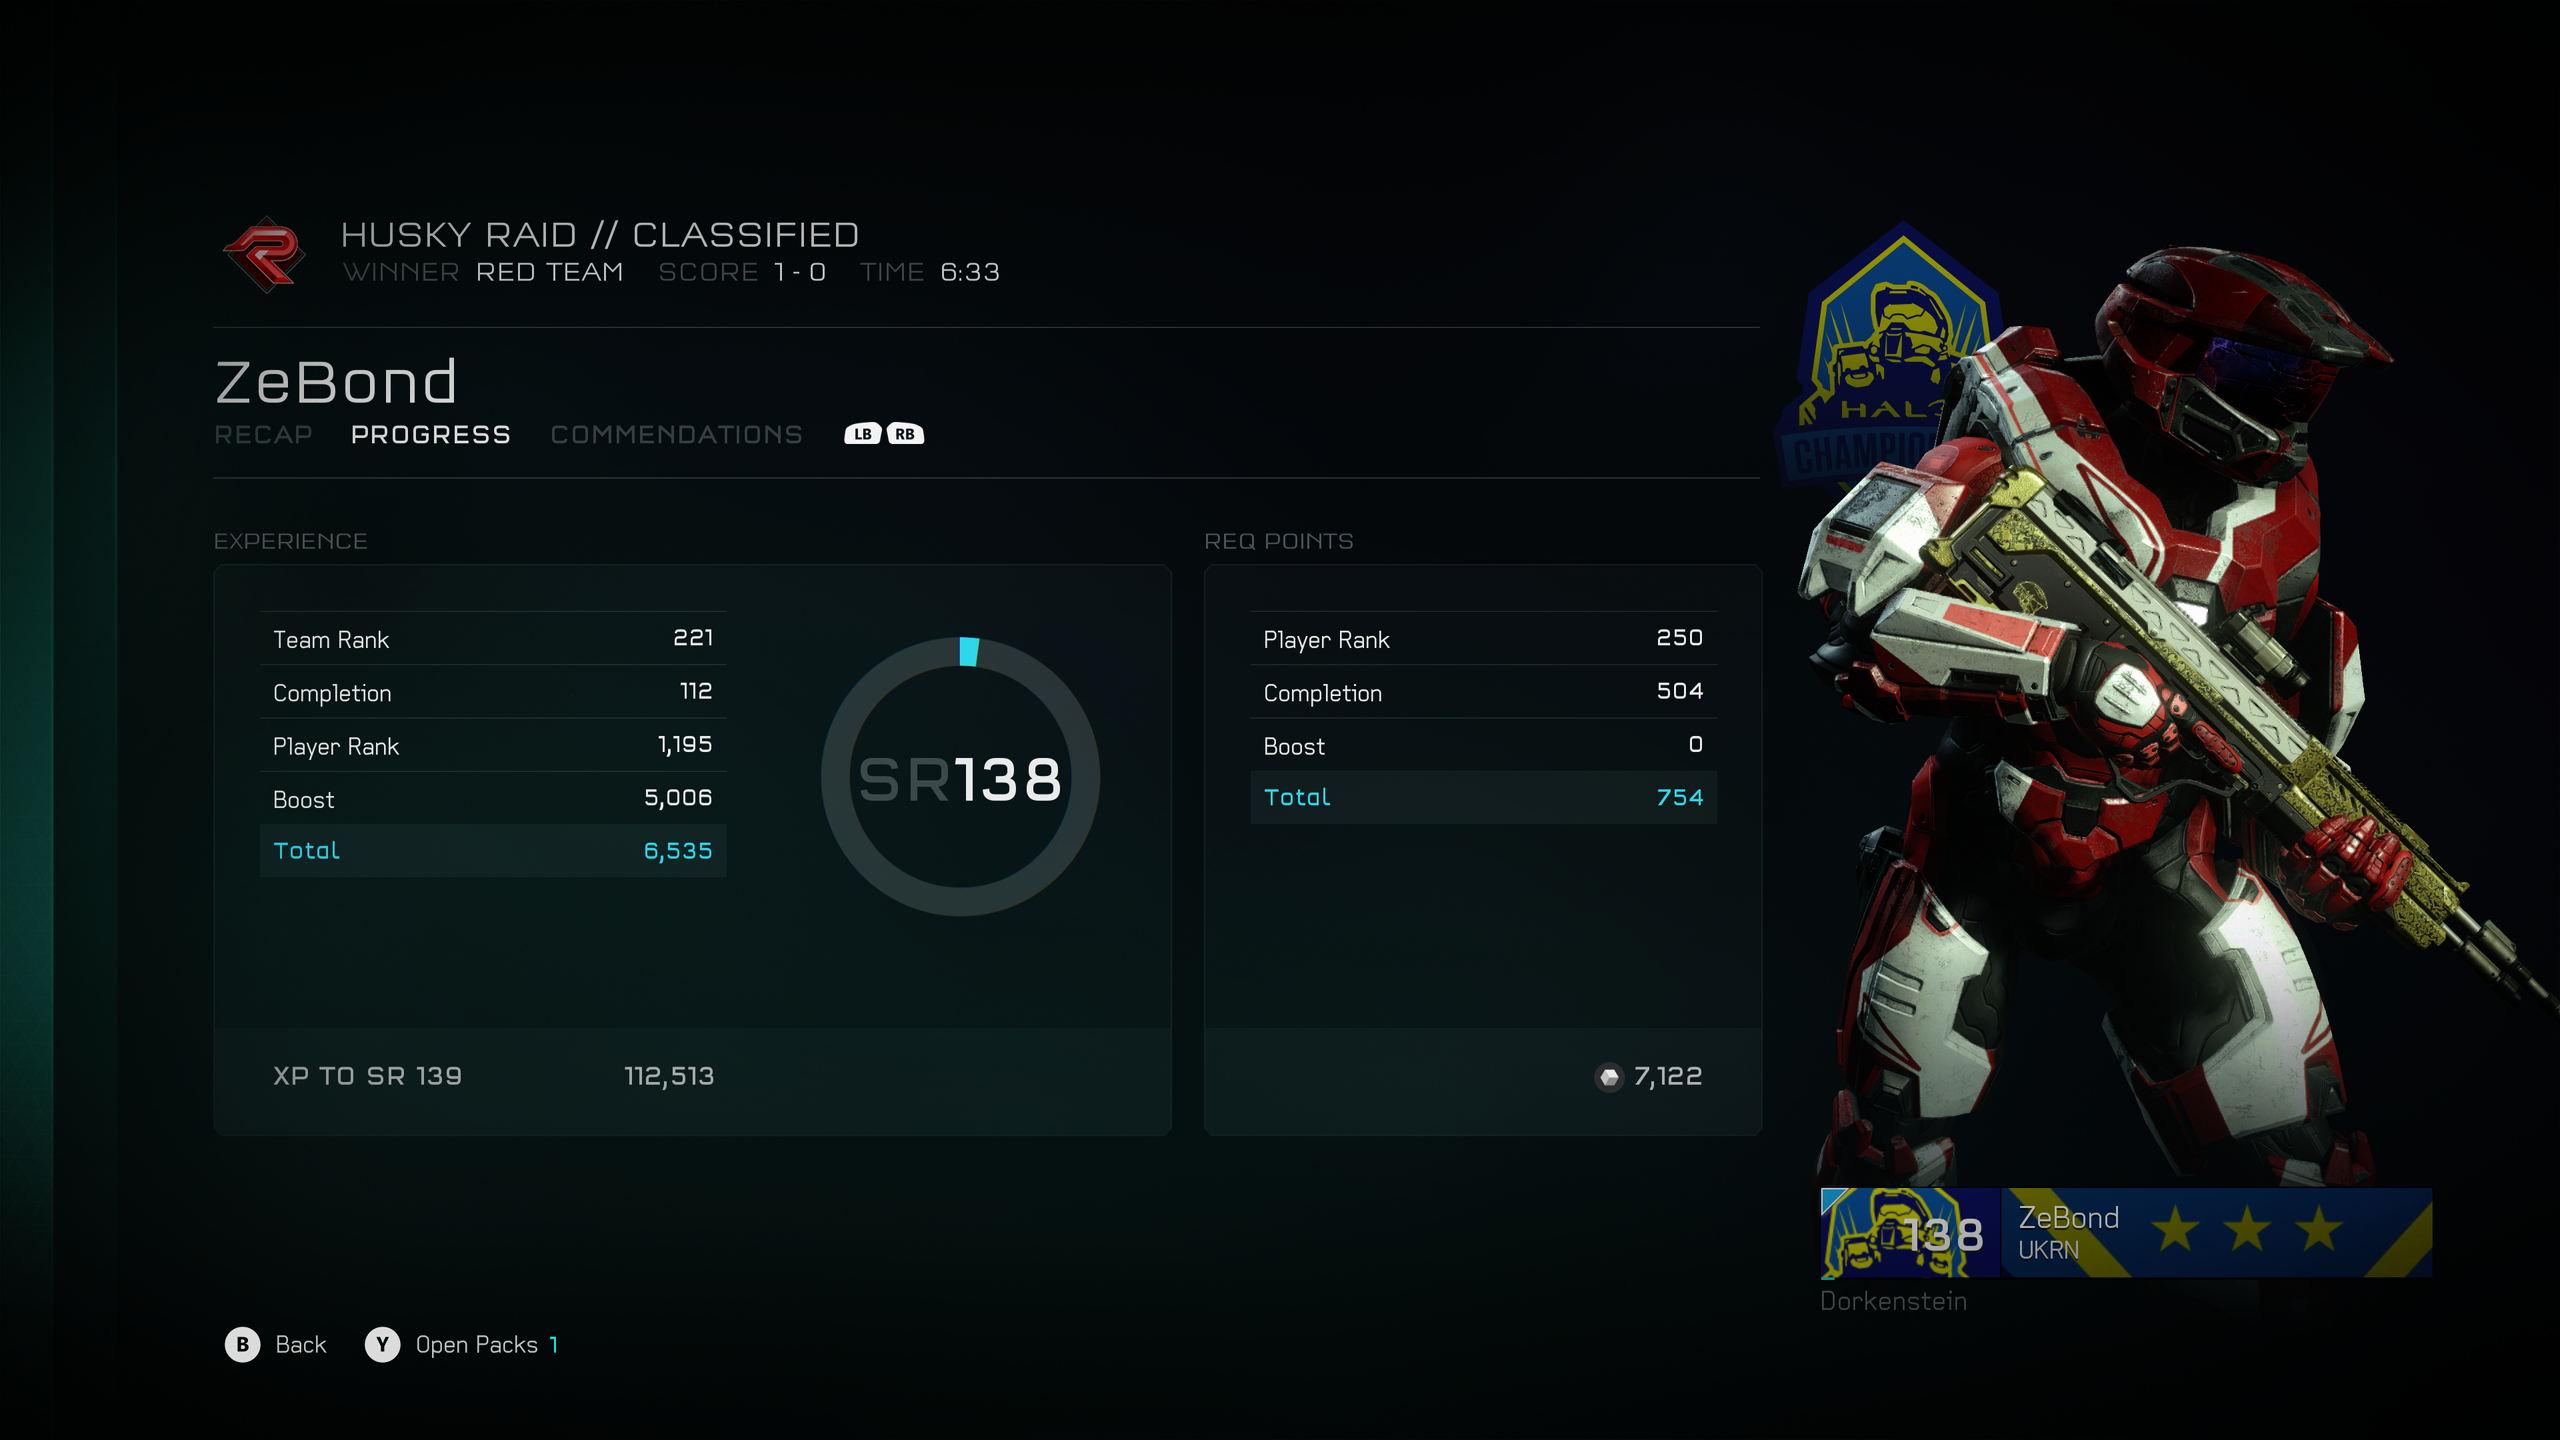 Halo 5 showing the player service record at SR138.